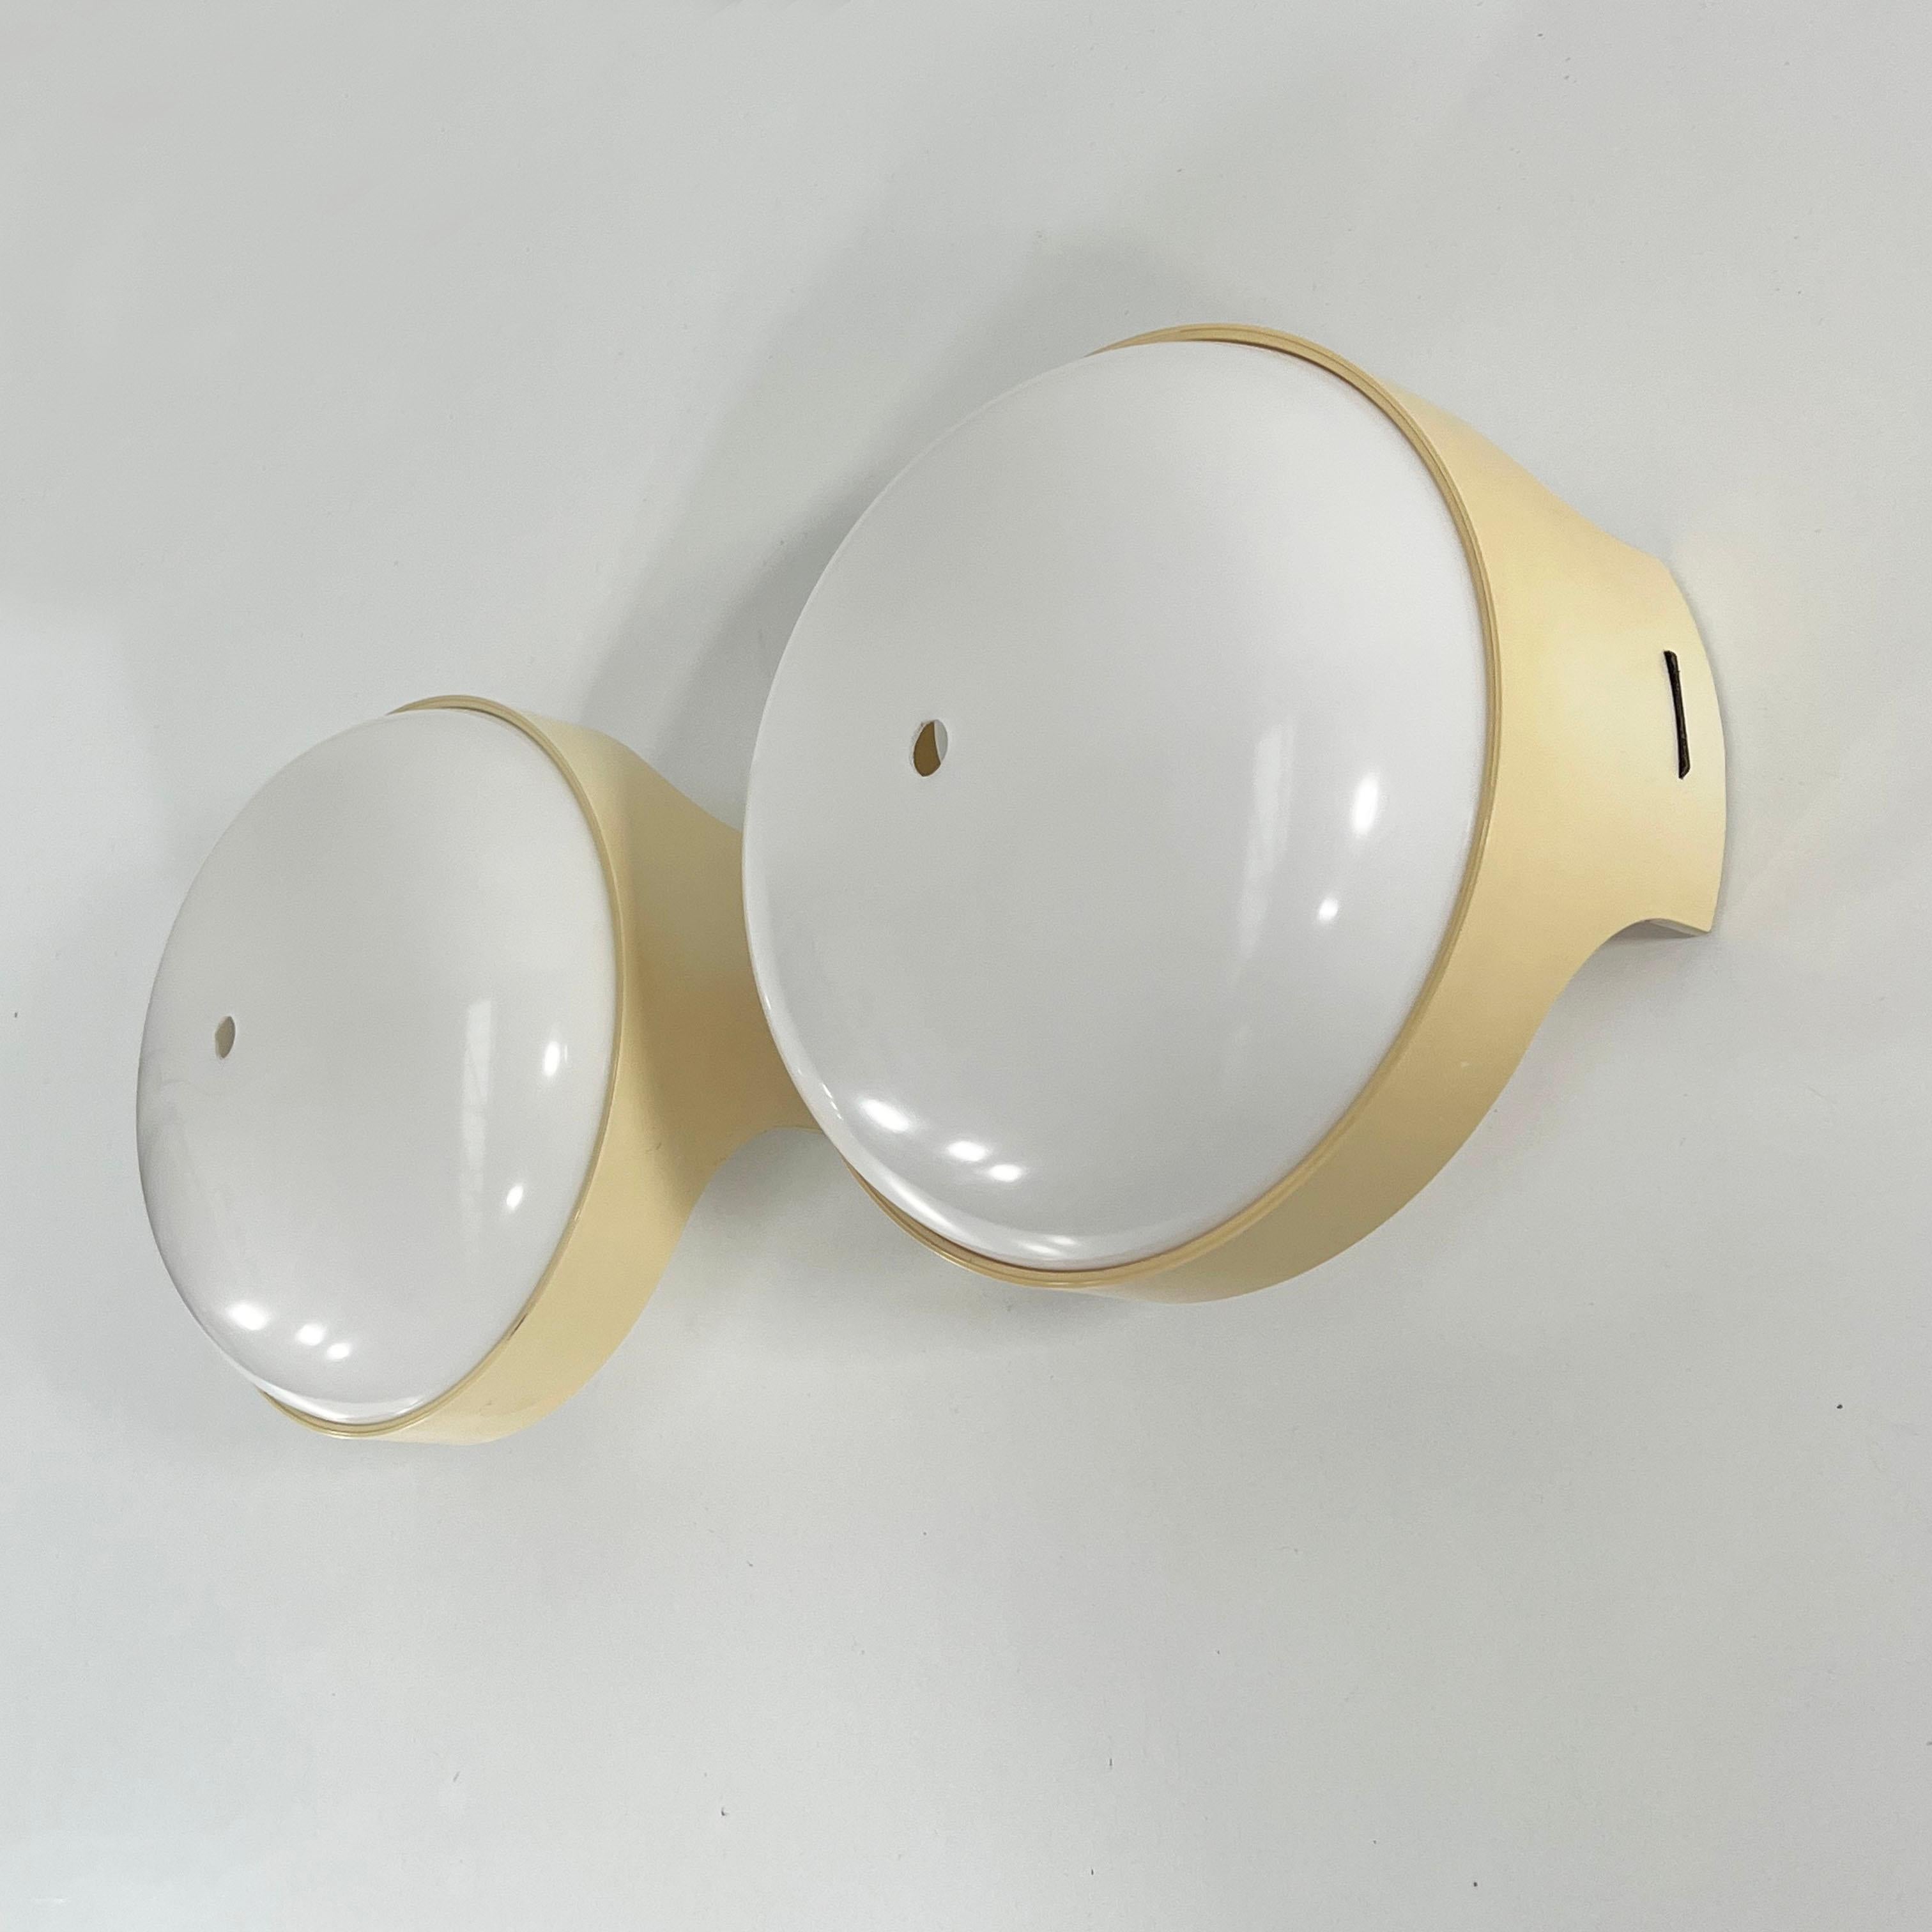 Mid-Century Modern Pair of Quattro KD 4335 Wall Lamps by Joe Colombo for Kartell, 1960 For Sale